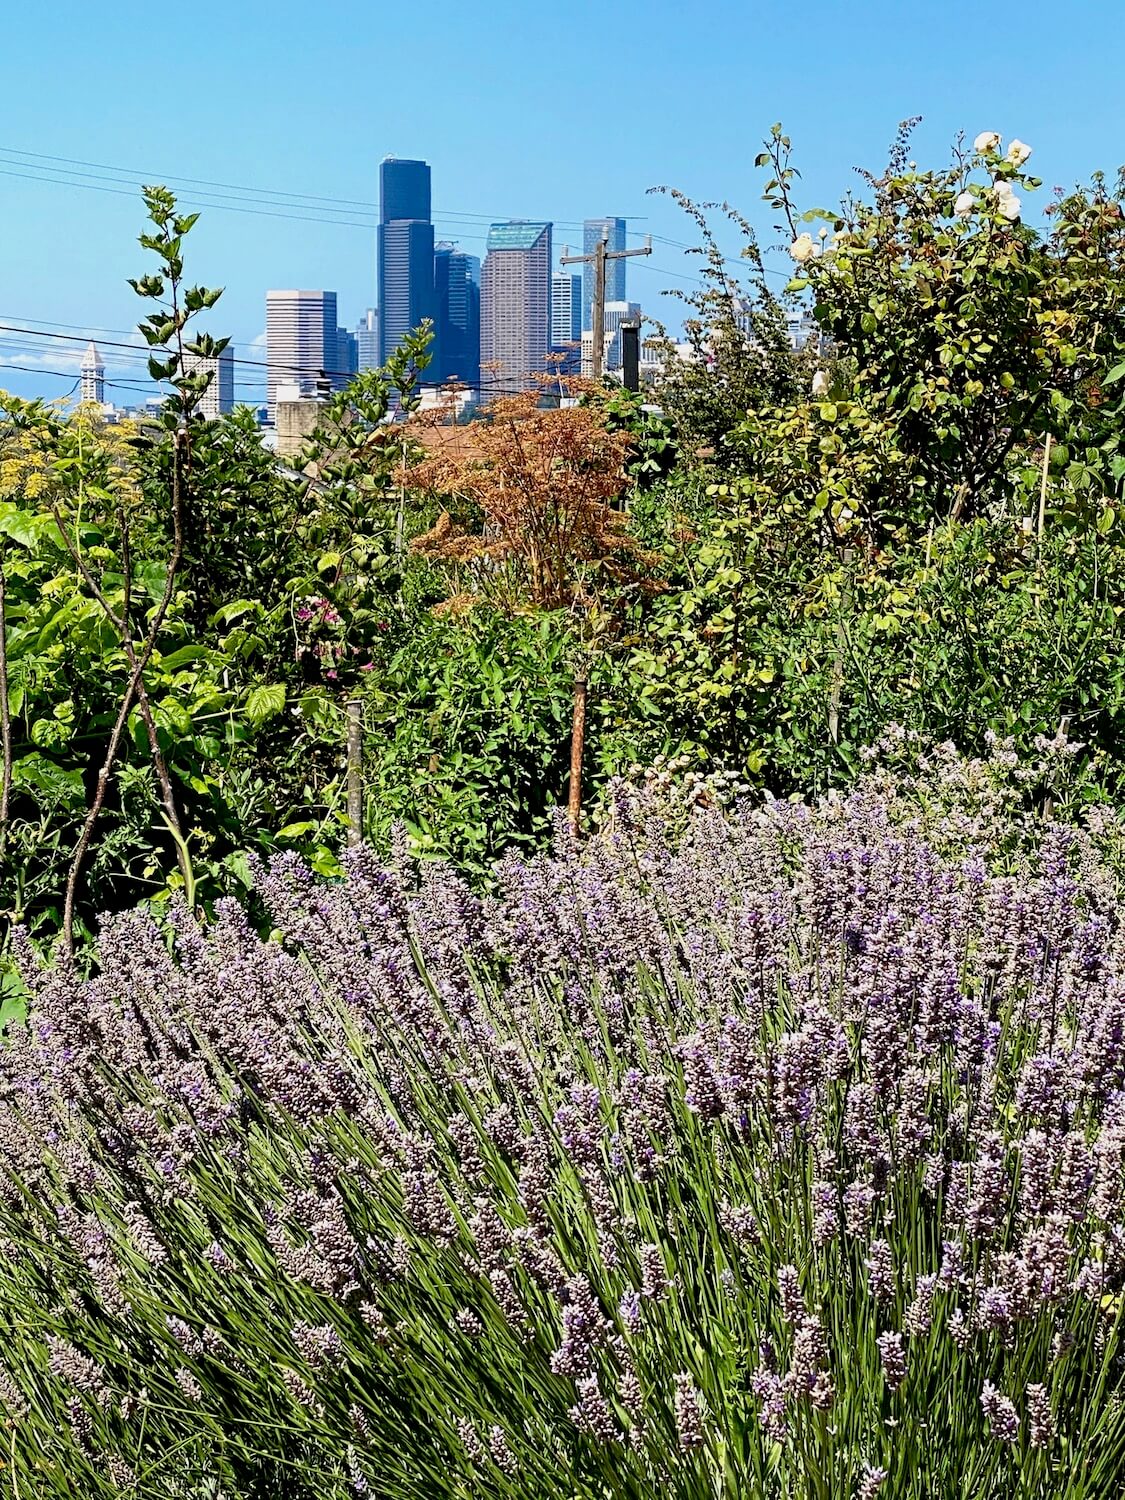 A large lavender plant shows up bright purple flowers while the tall buildings of the Seattle skyline rise up in the background. Botanic gardens like Bradner are an important part of Seattle's nature offerings.